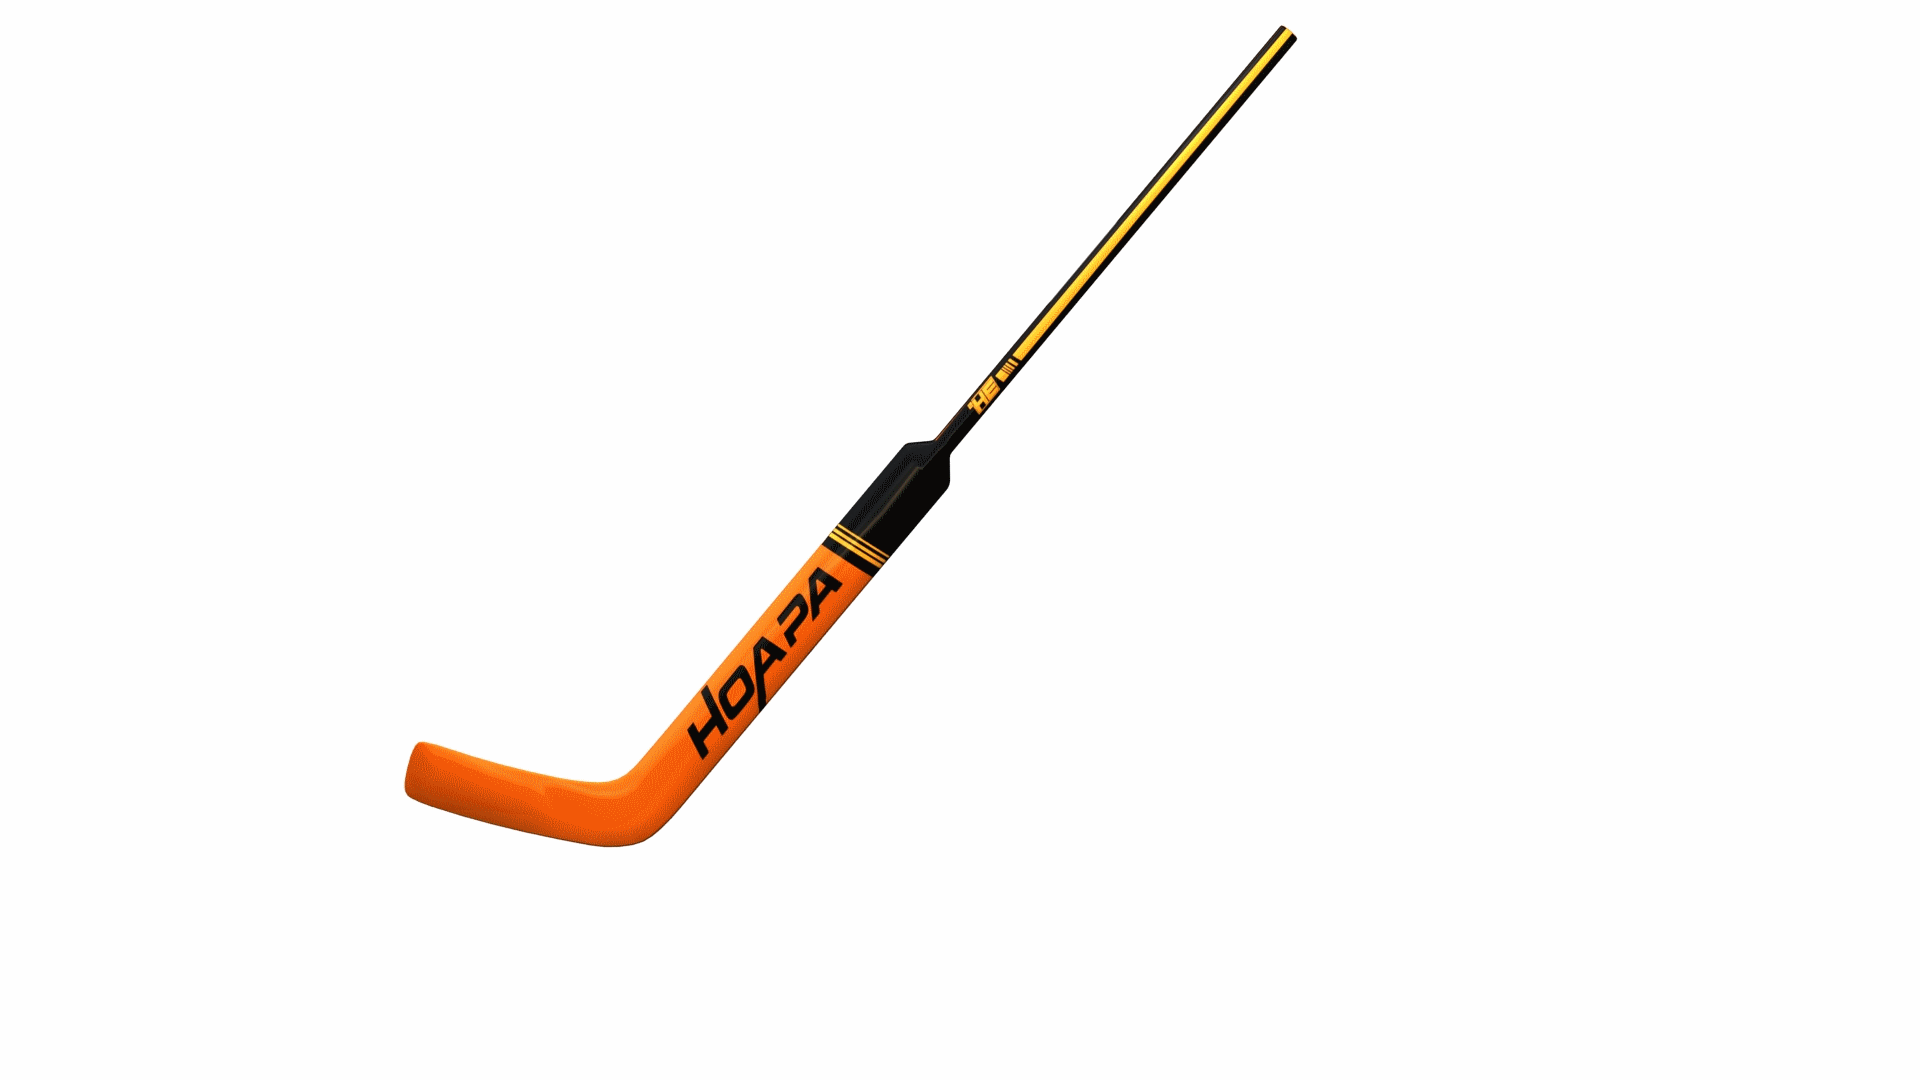 Customized Vr1 Goalie Sticks Made in China - China Goalie Sticks and Ice Hockey  Sticks price